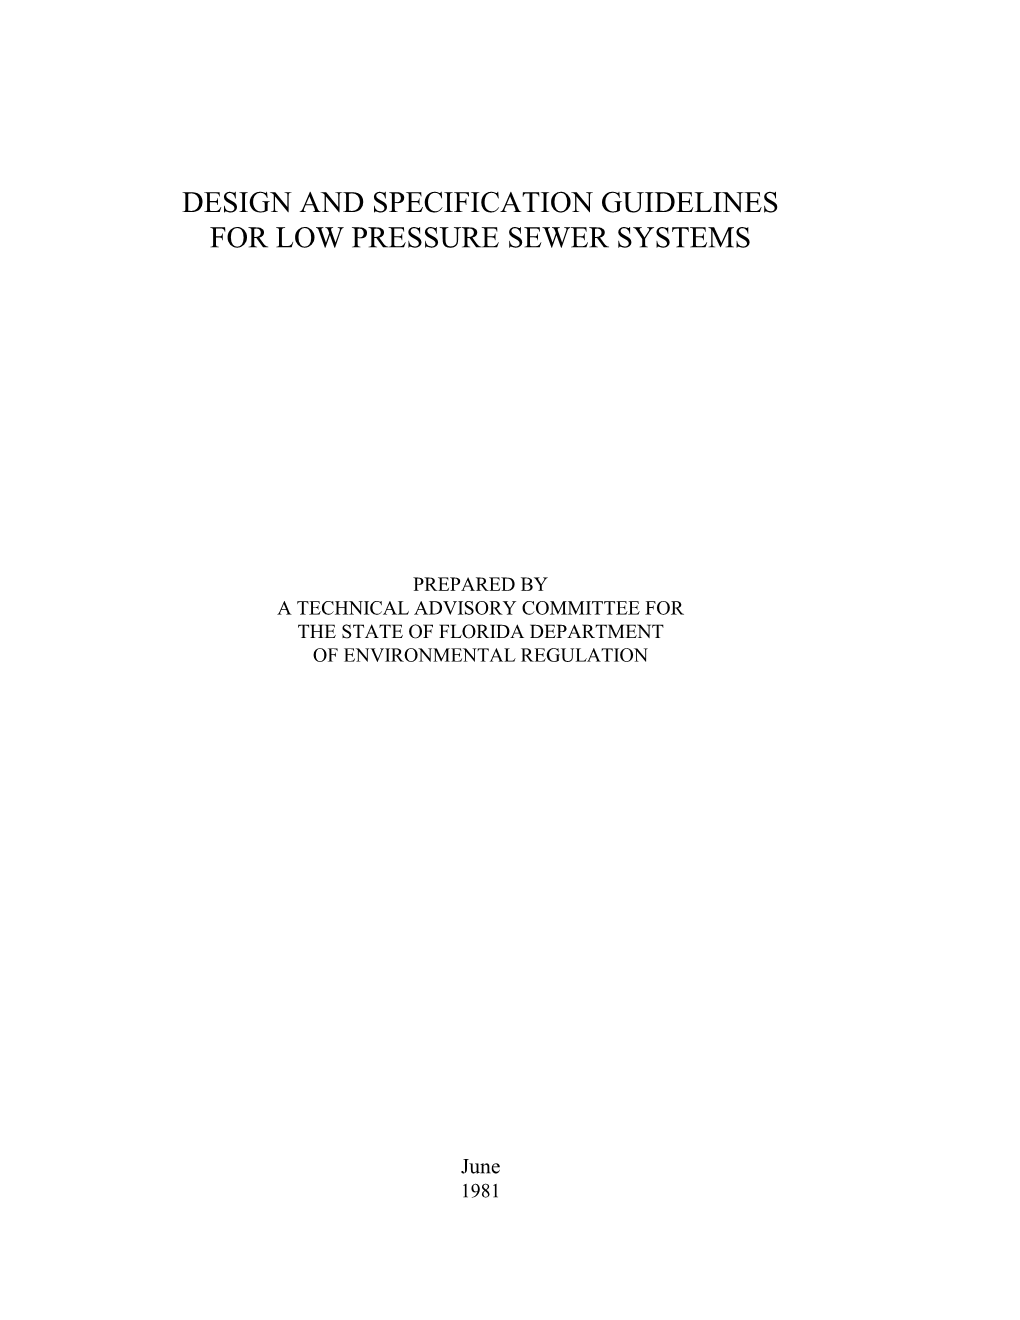 Design and Specification Guidelines for Low Pressure Sewer Systems